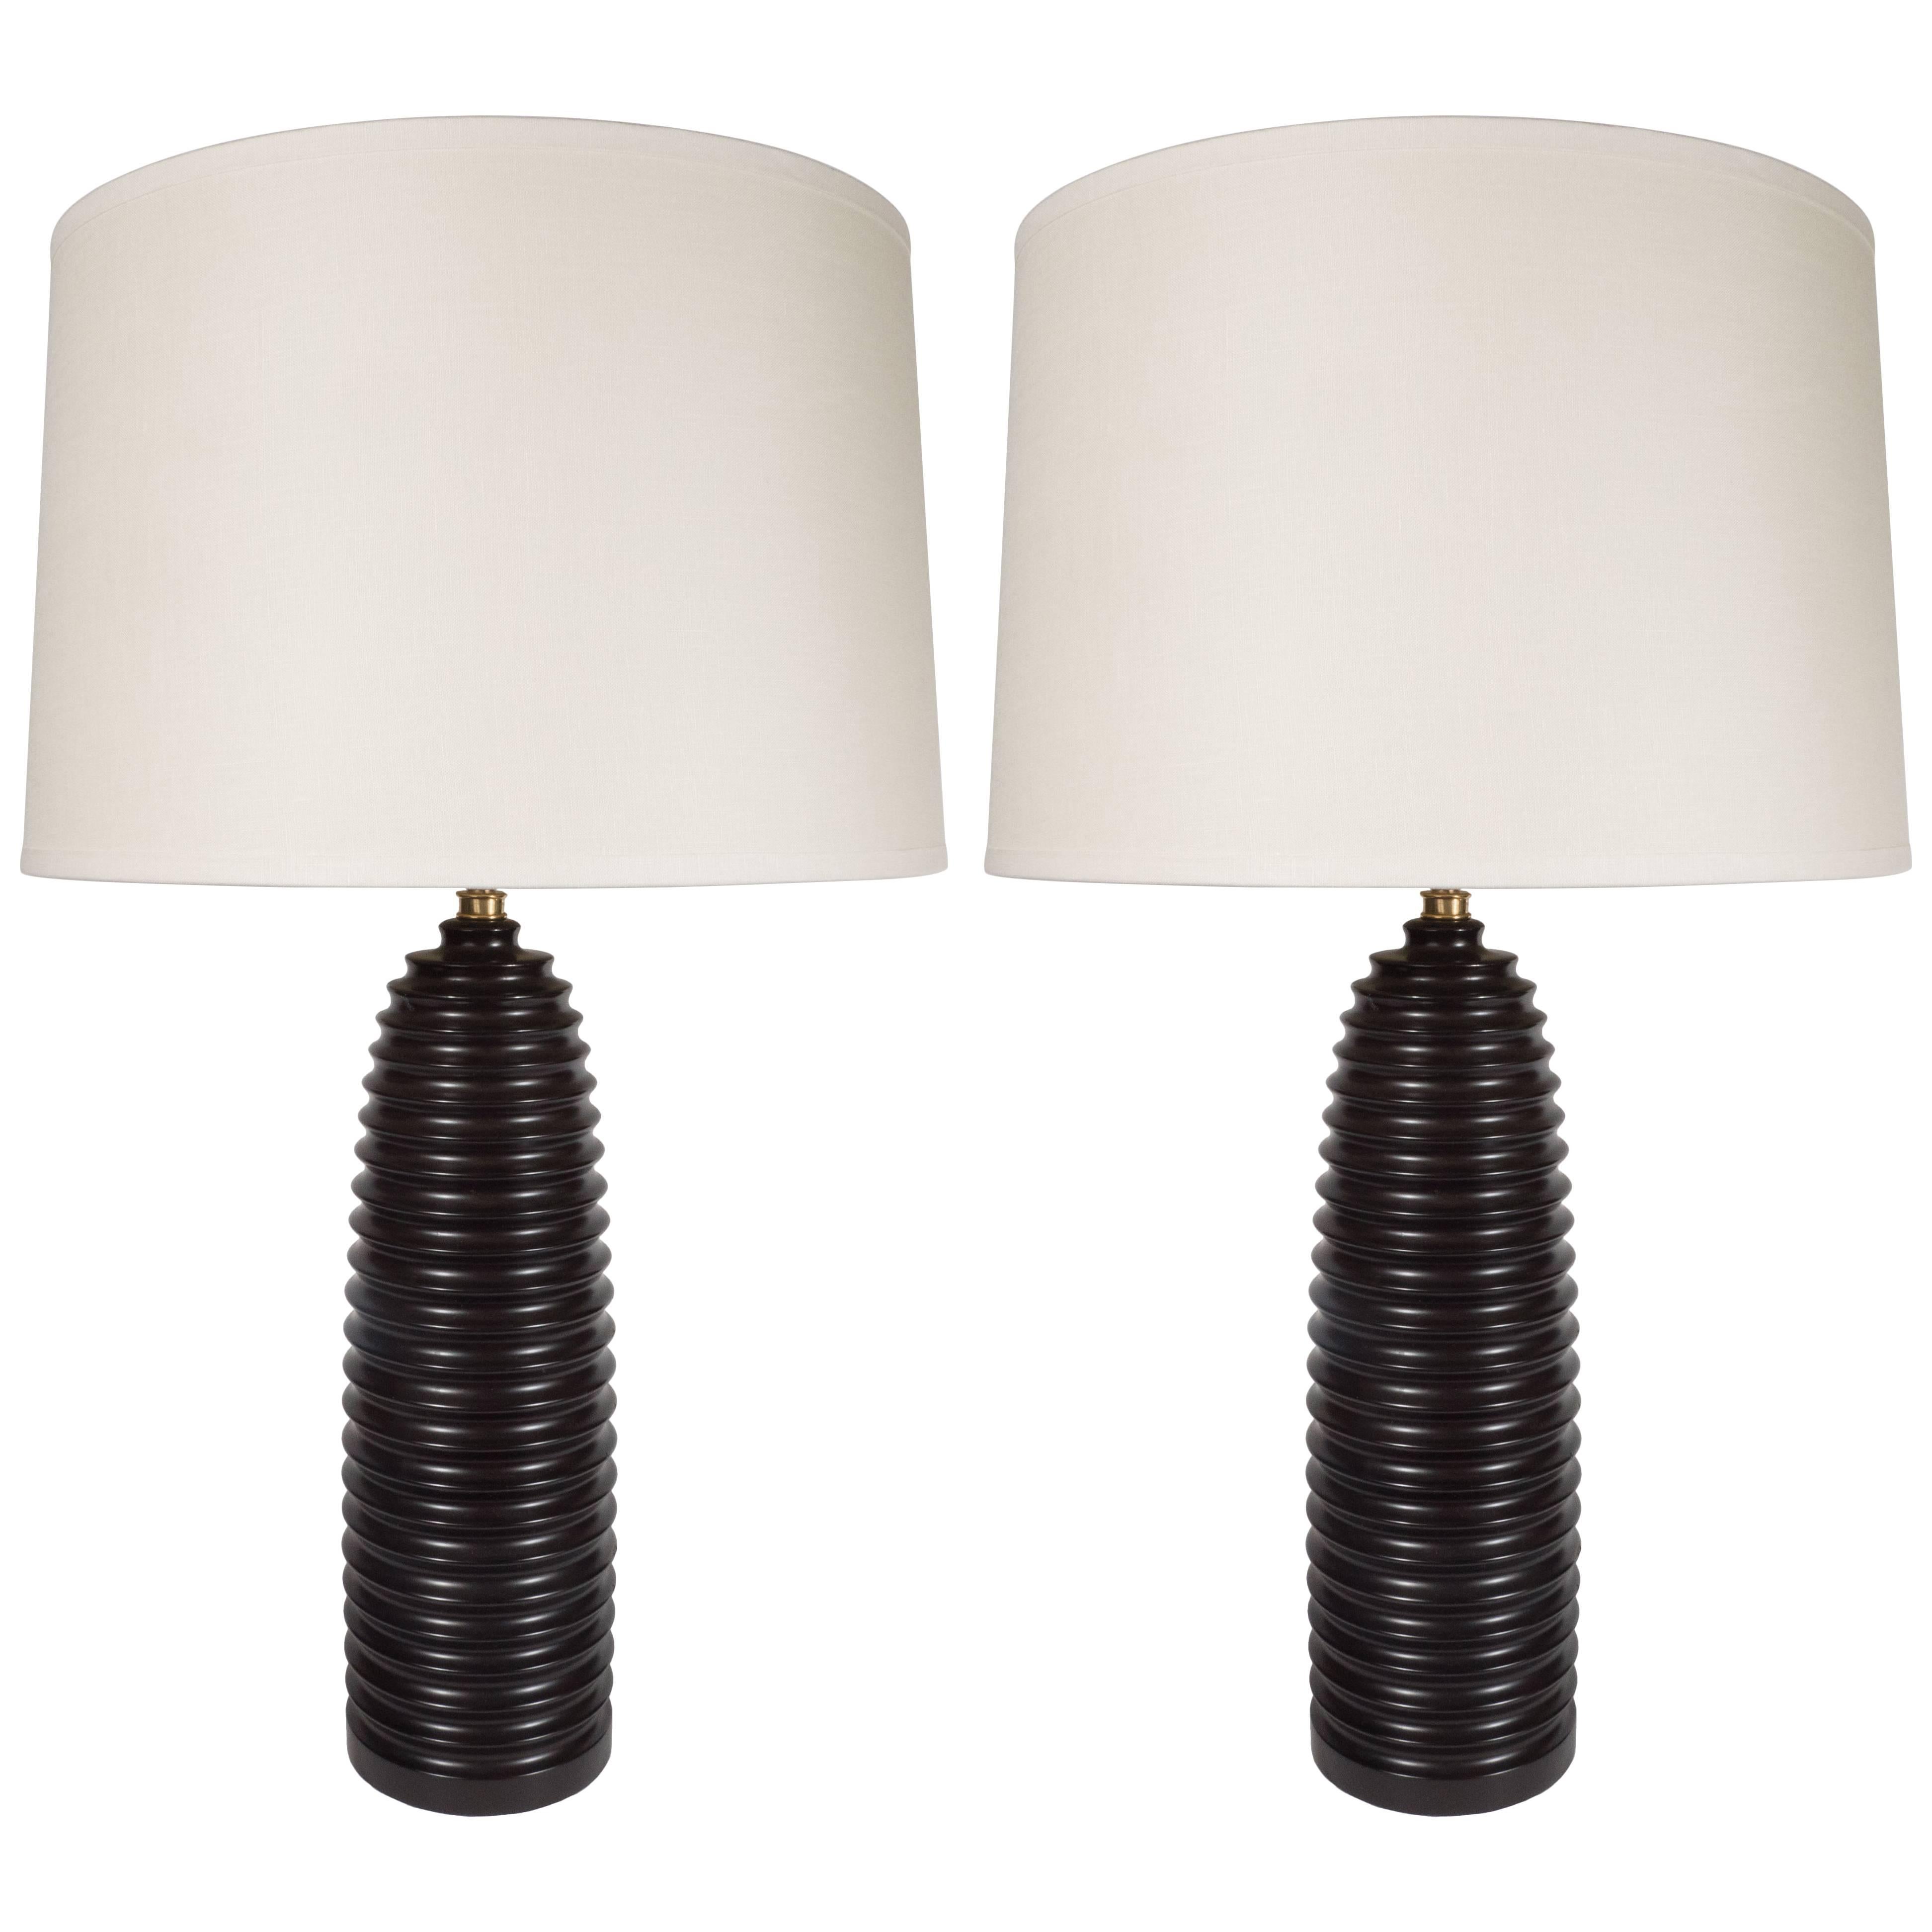 Pair of Ribbed Ceramic Bullet Lamps by Marian Jamieson in a Deep Charcoal Hue